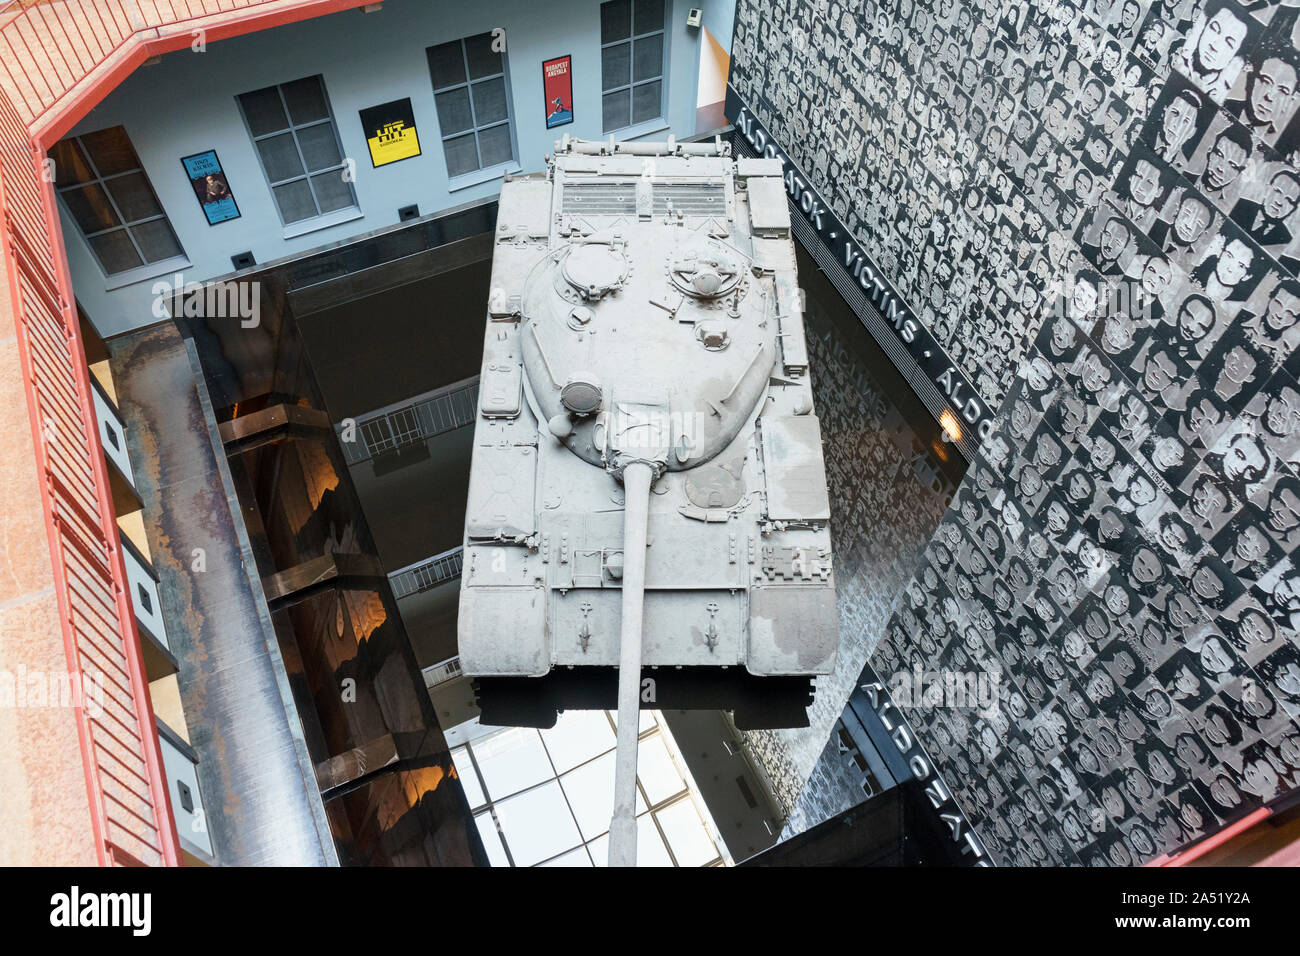 Budapest, Hungary - Oct 15, 2019: A T-54 tank exhibited in The House of Terror Museum, Budapest , Hungary Stock Photo